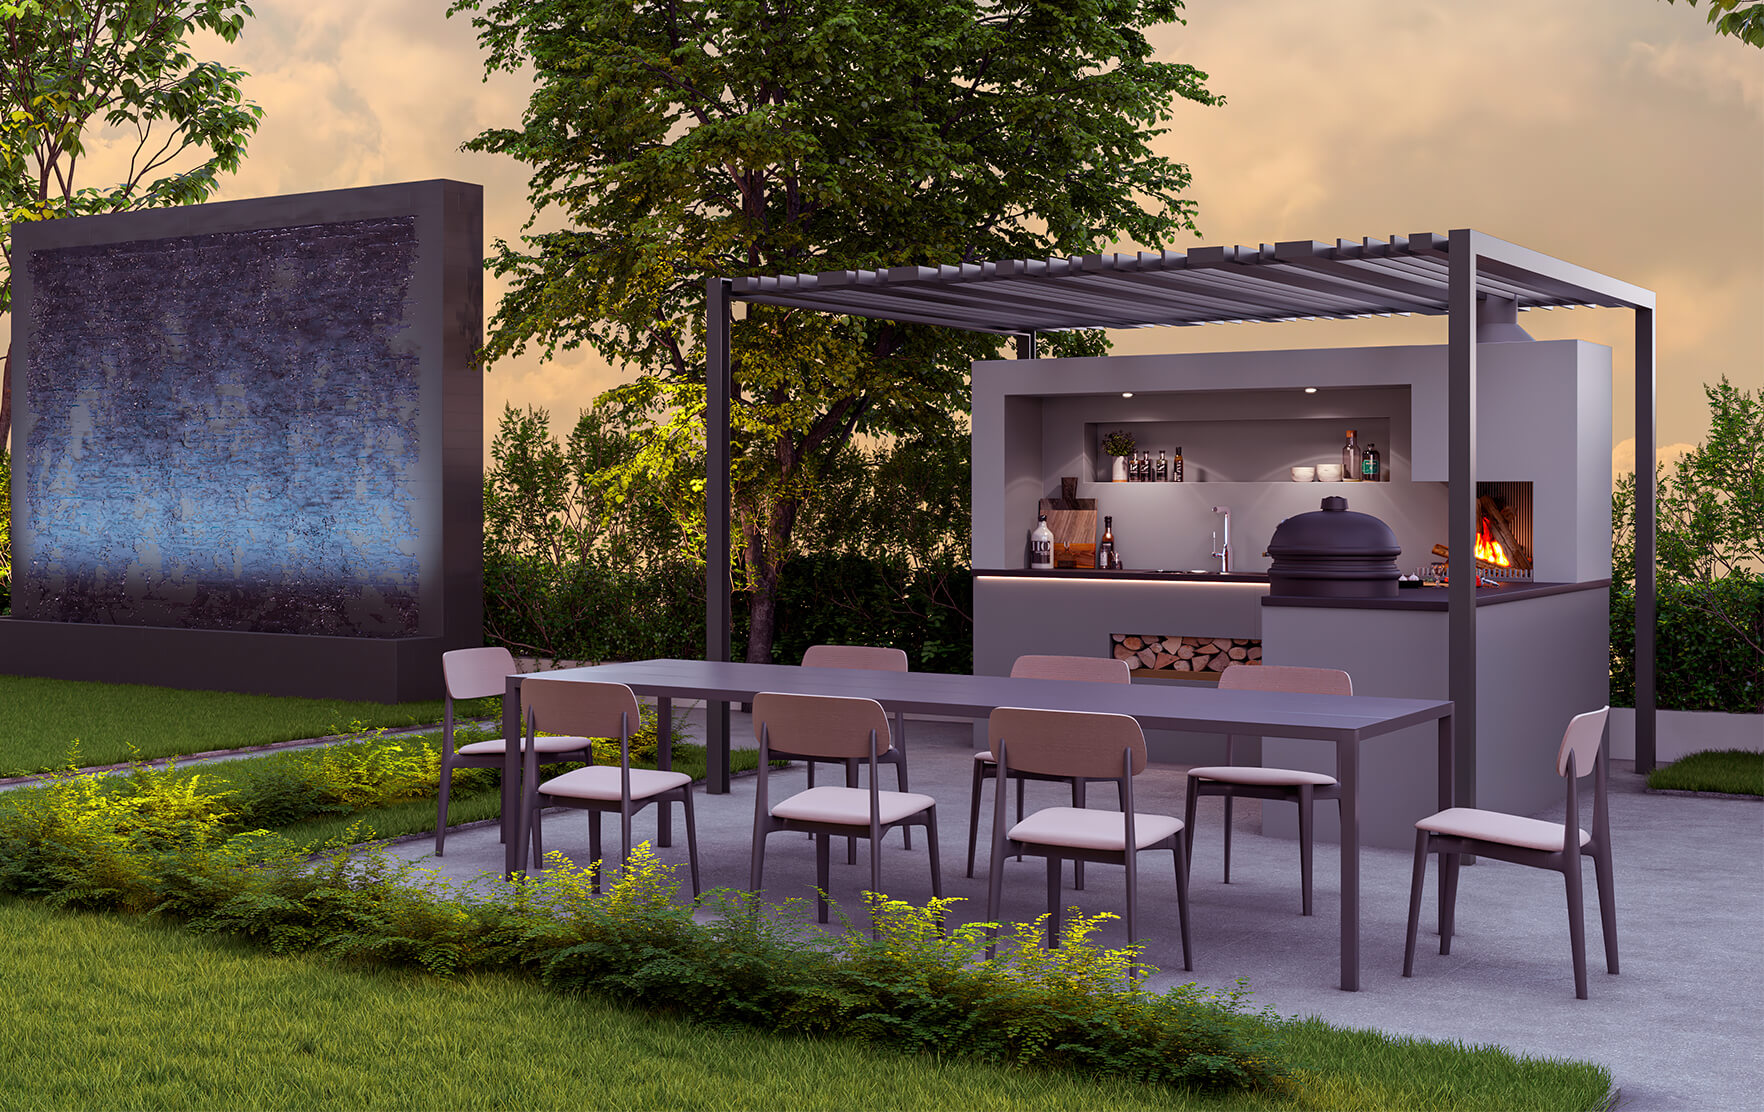 BARBECUE STATION WITH WITH OUTDOOR DINING